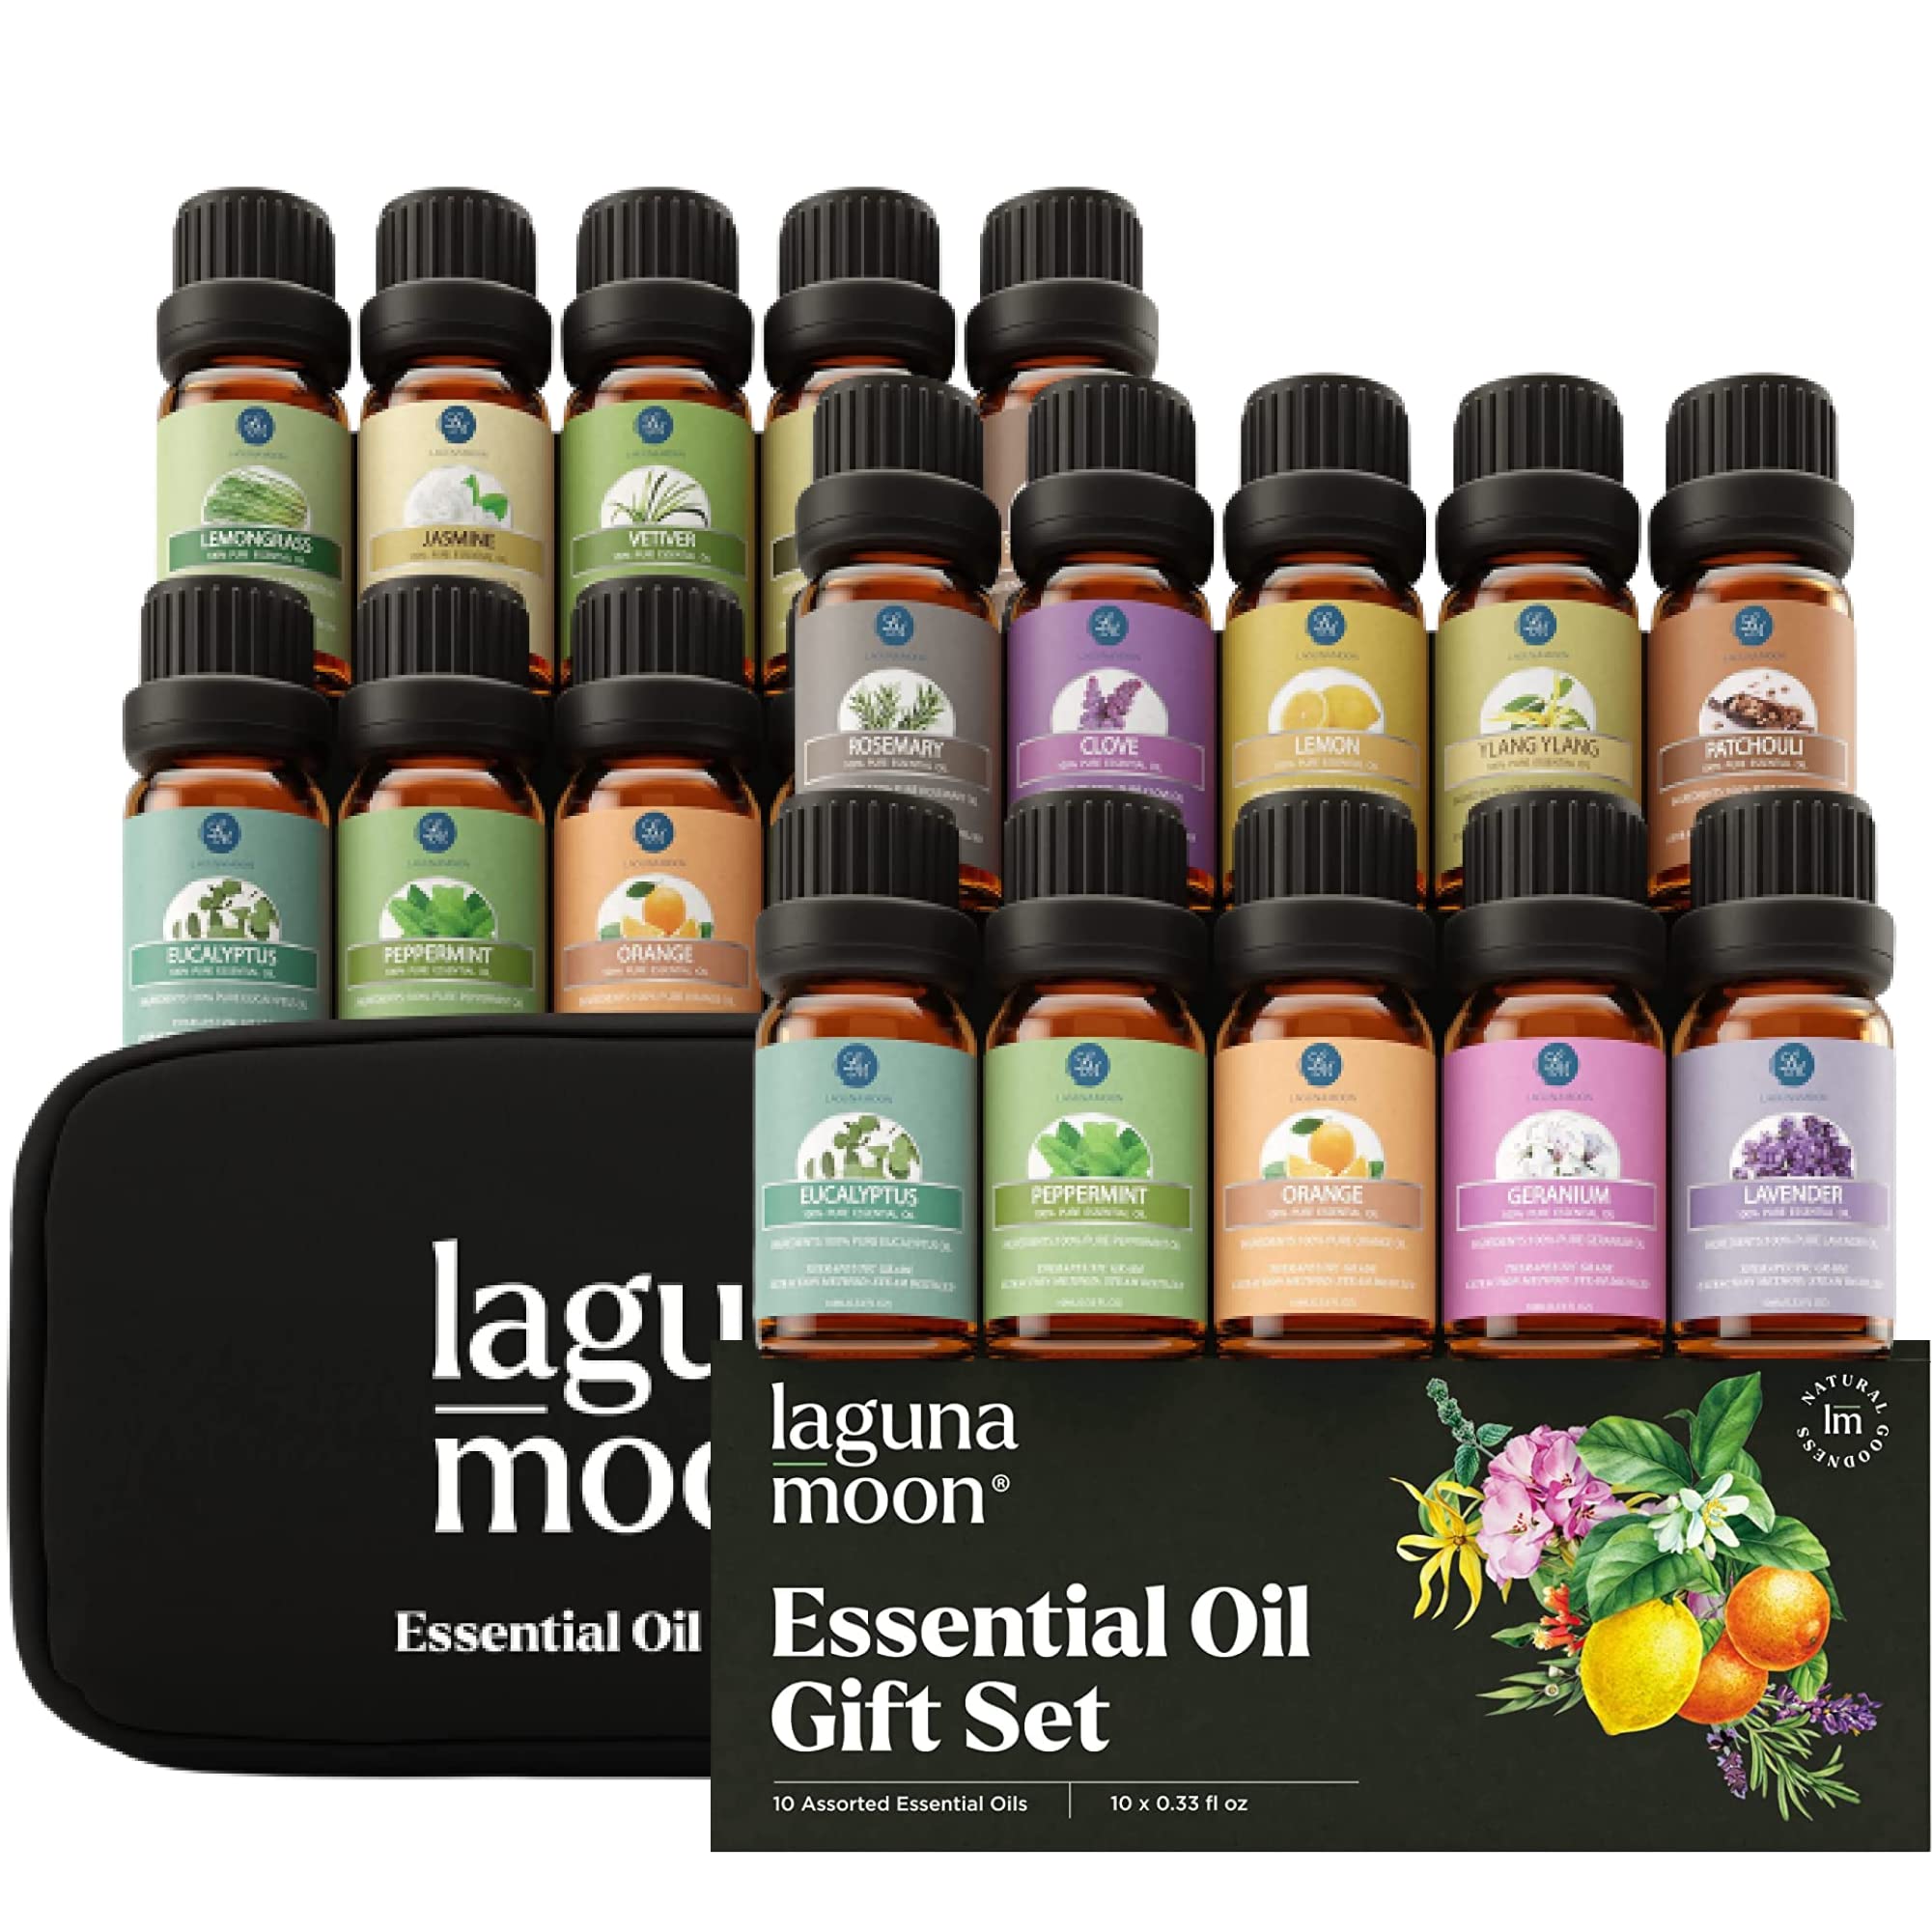 Ultimate Essential Oils Bundle: 2 x 10 Gift Set with Travel Bag and Gift Box - for Diffuser, Humidifier, Massage, Aromatherapy, Skin & Hair Care